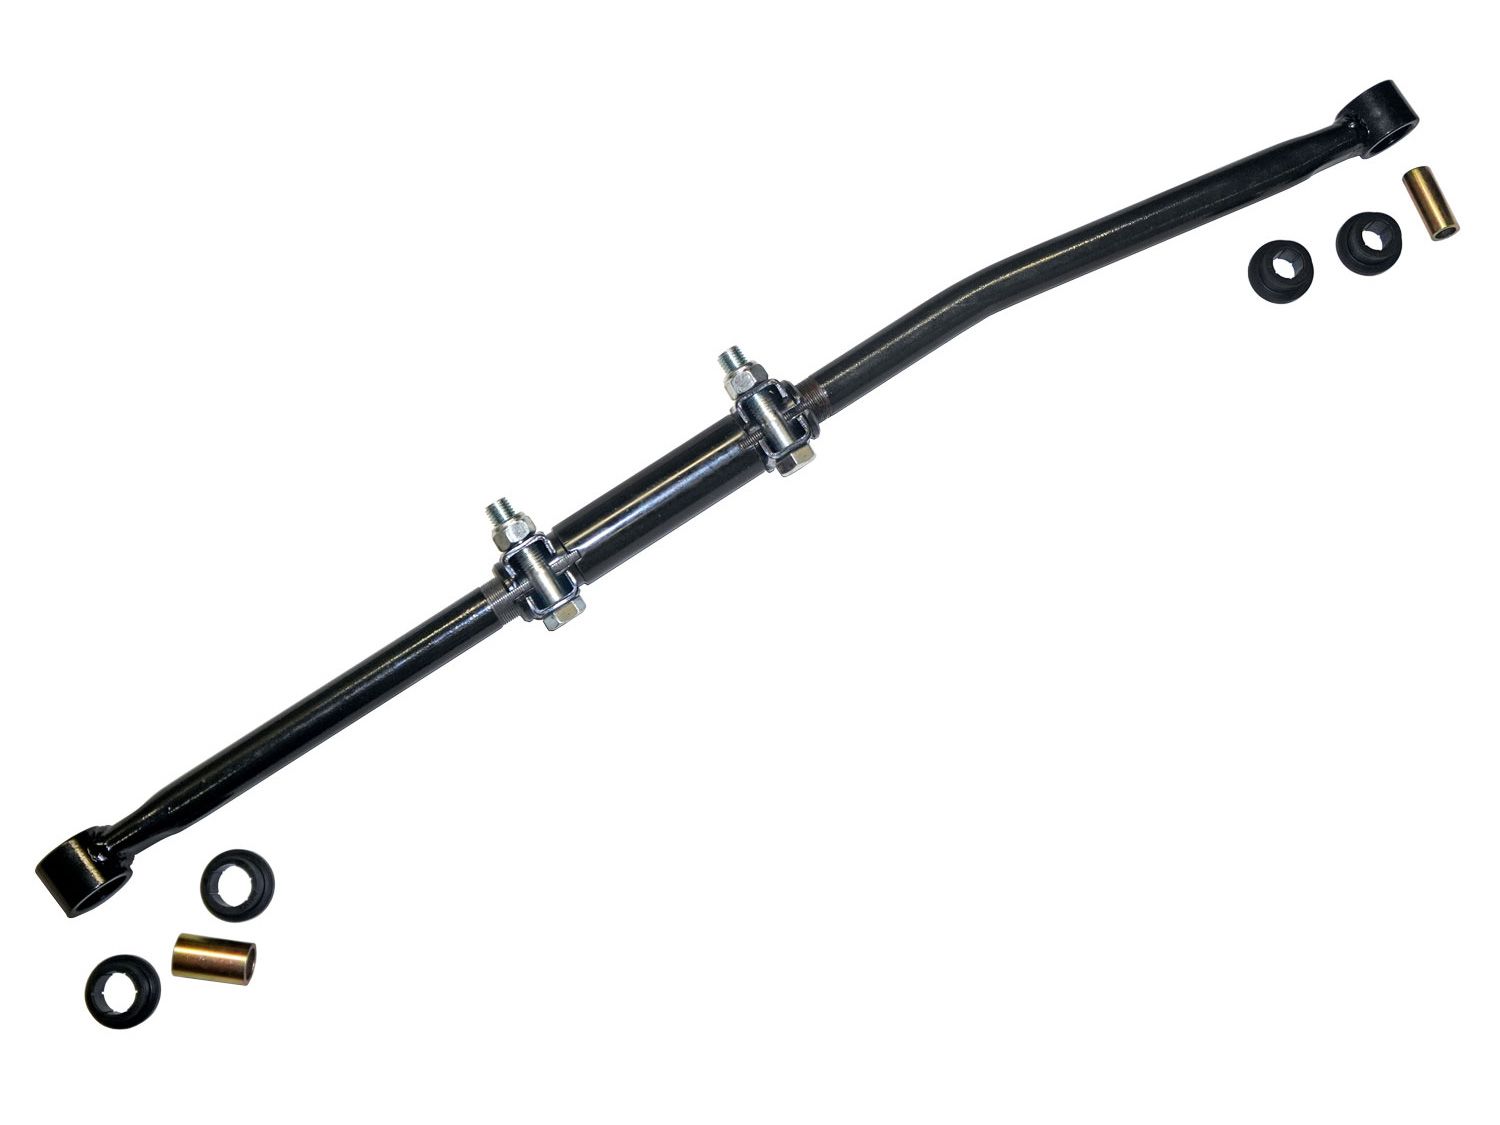 F100/F150 1976-1979 Ford (w/ 0-9" Lift) - Front Adjustable Track Bar by Skyjacker